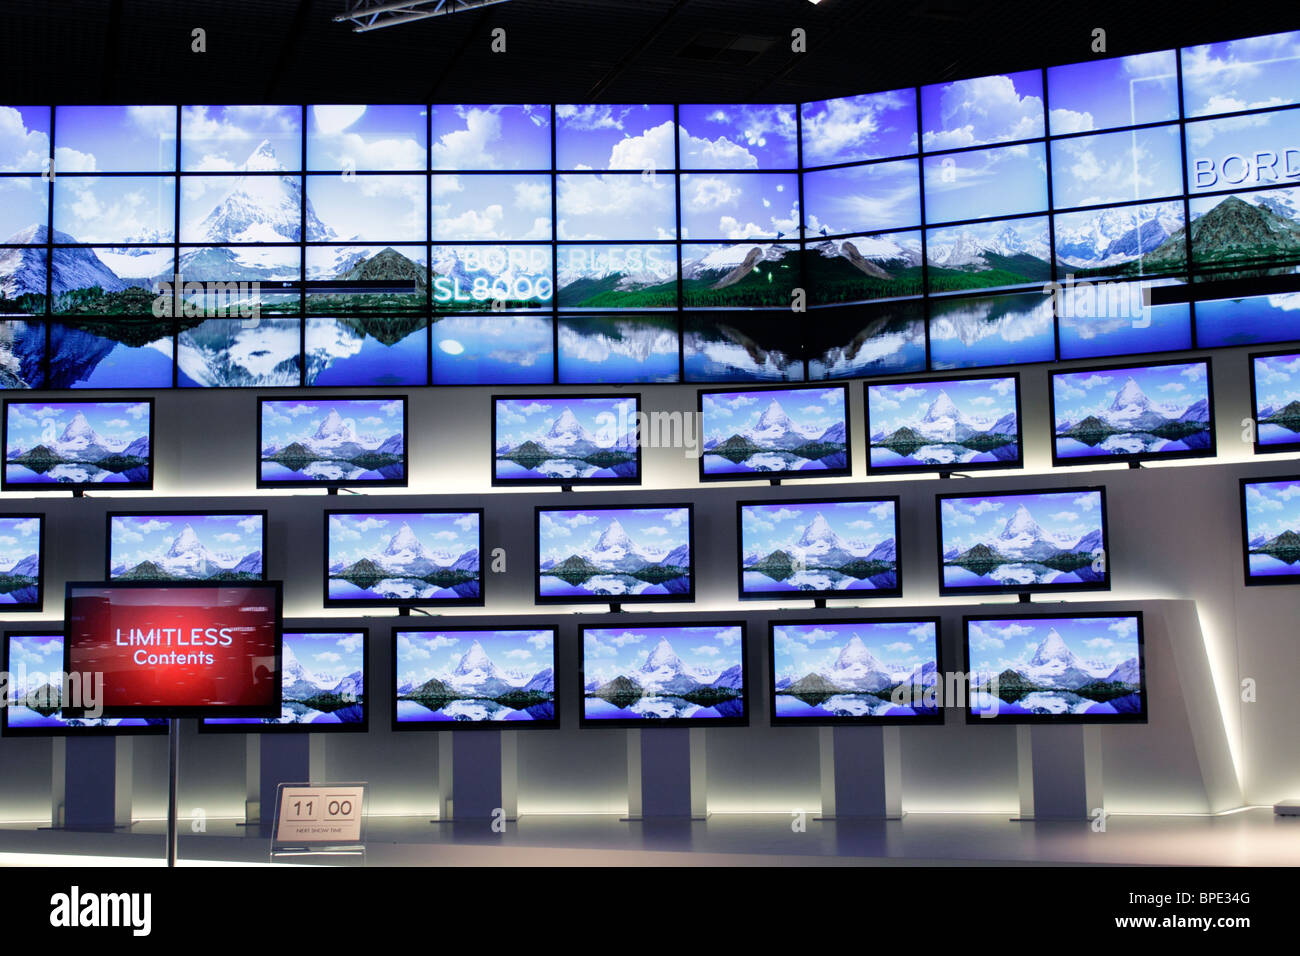 Berlin, IFA, Consumer Electronics Unlimited, many flat screens, LED TV, SL9000 Borderless, in an artistic installation by LG. Stock Photo